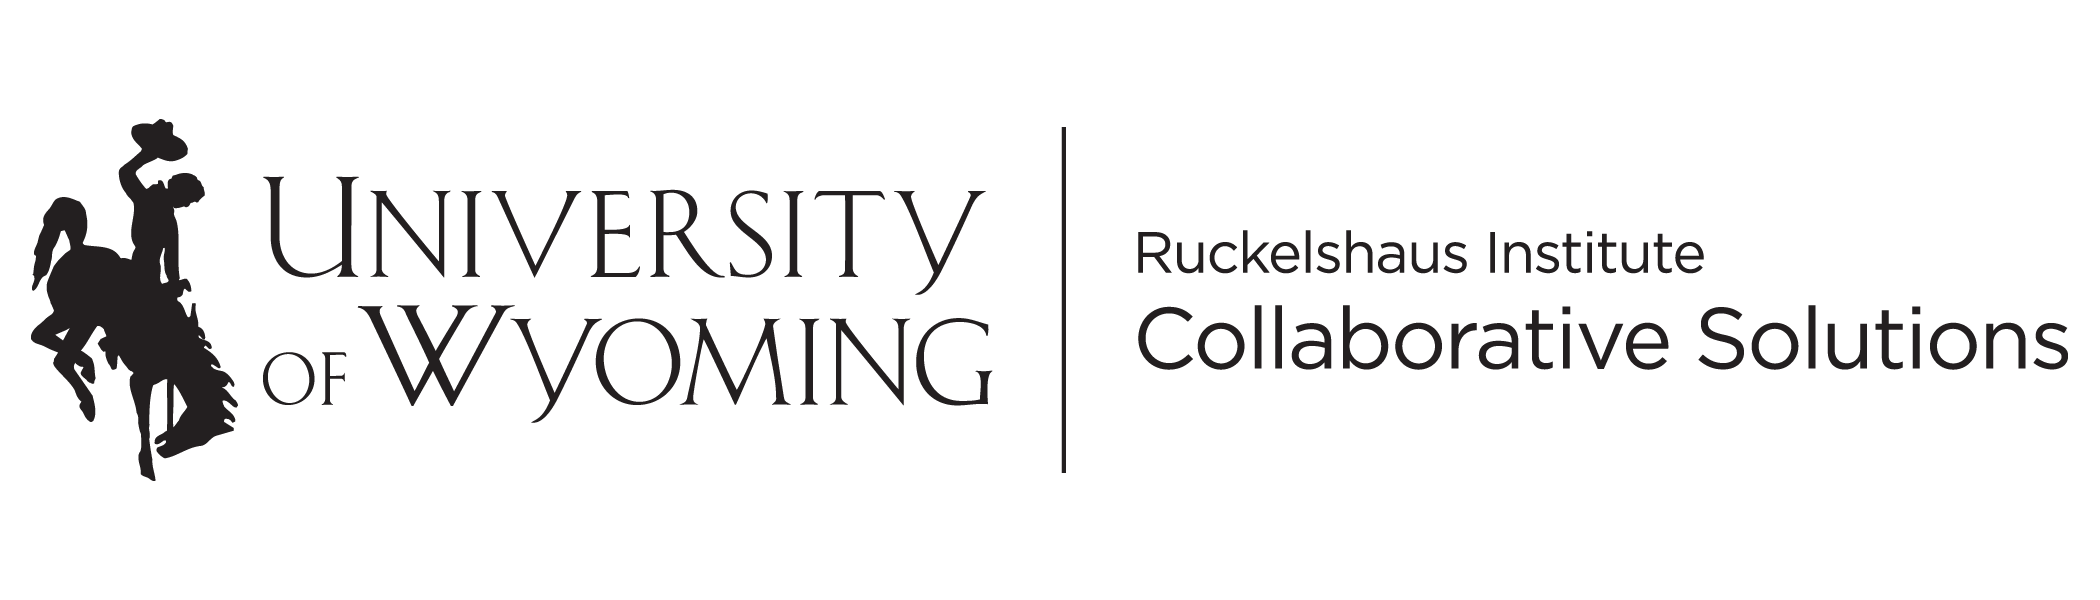 University of Wyoming Ruckelshaus Institute Collaborative Solutions logo with bucking horse icon.